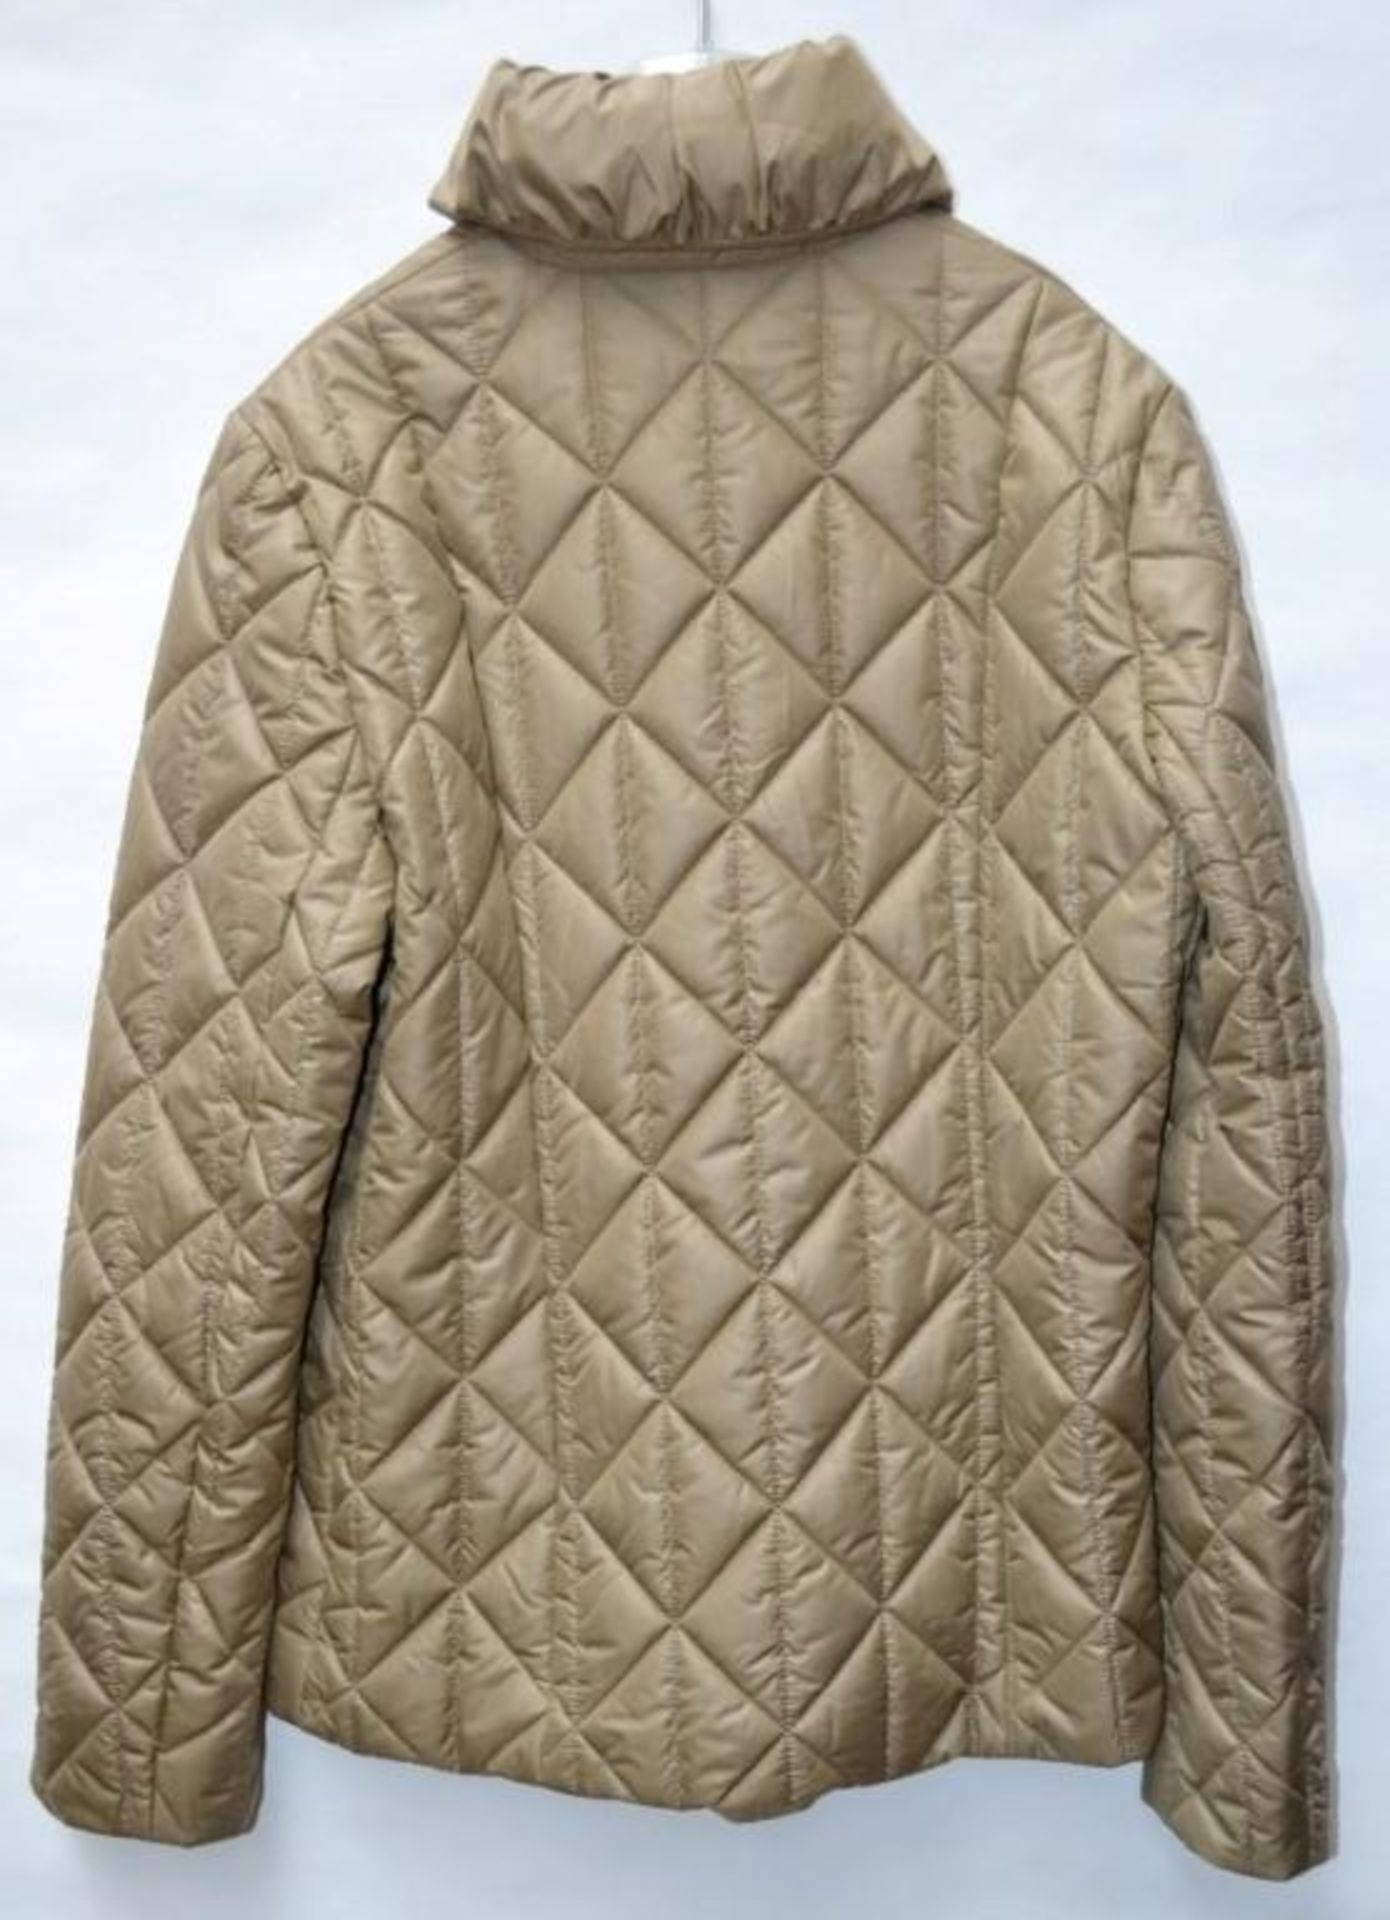 1 x Steilmann Womens Padded Coat With Concealed Hood In Collar - Colour: Bronzed Beige - UK Size 12 - Image 2 of 4